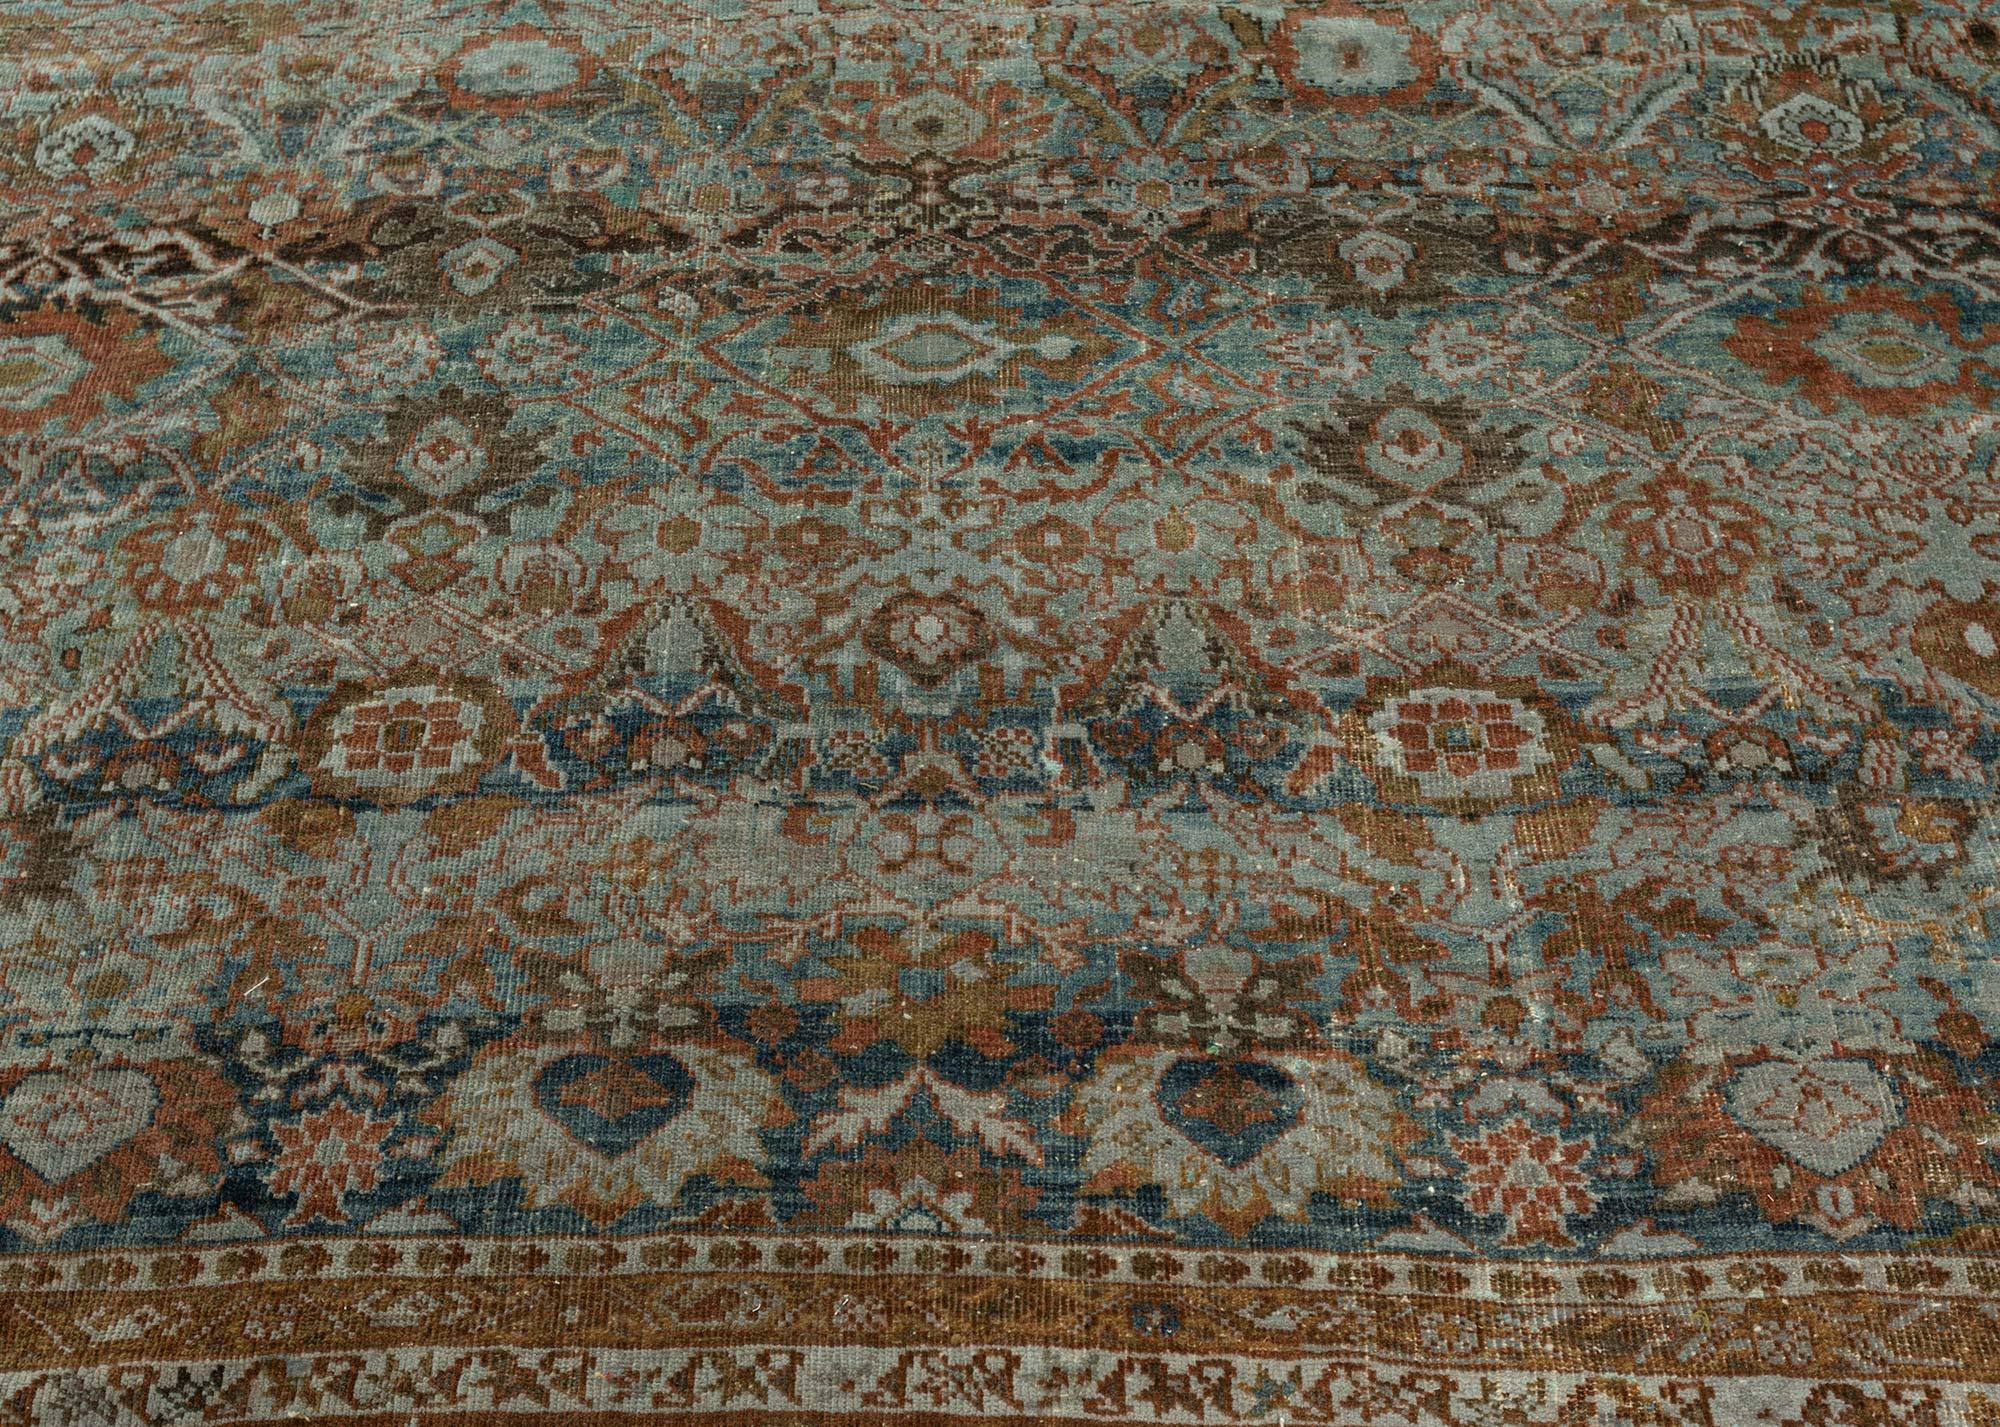 Early 20th Century Persian Sultanabad rug.
Size: 14'7